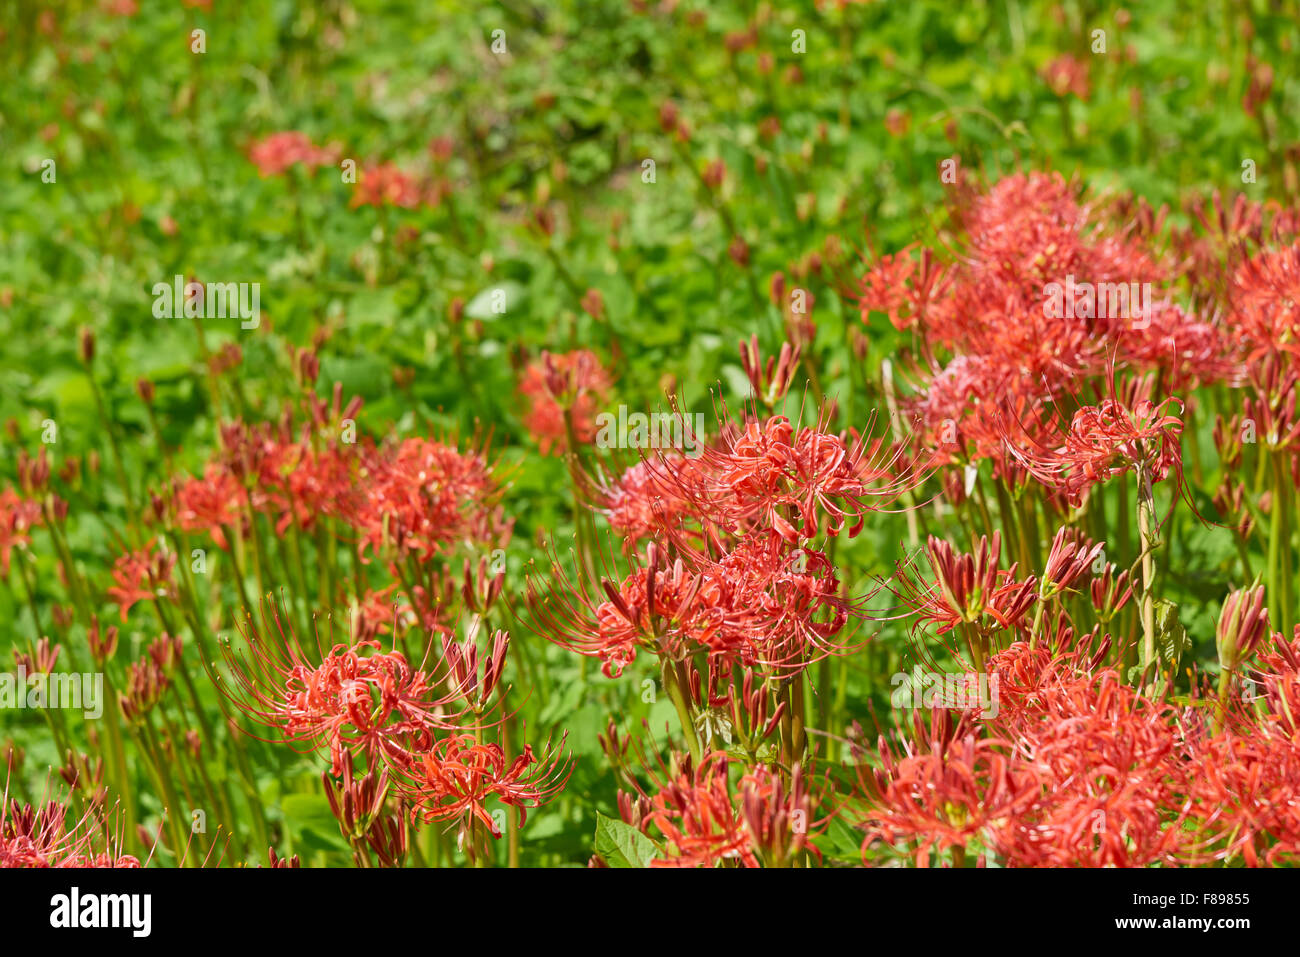 Closeup of Lycoris radiata. It also known as red spider lily, red magic lily or cluster-amaryllis. Stock Photo